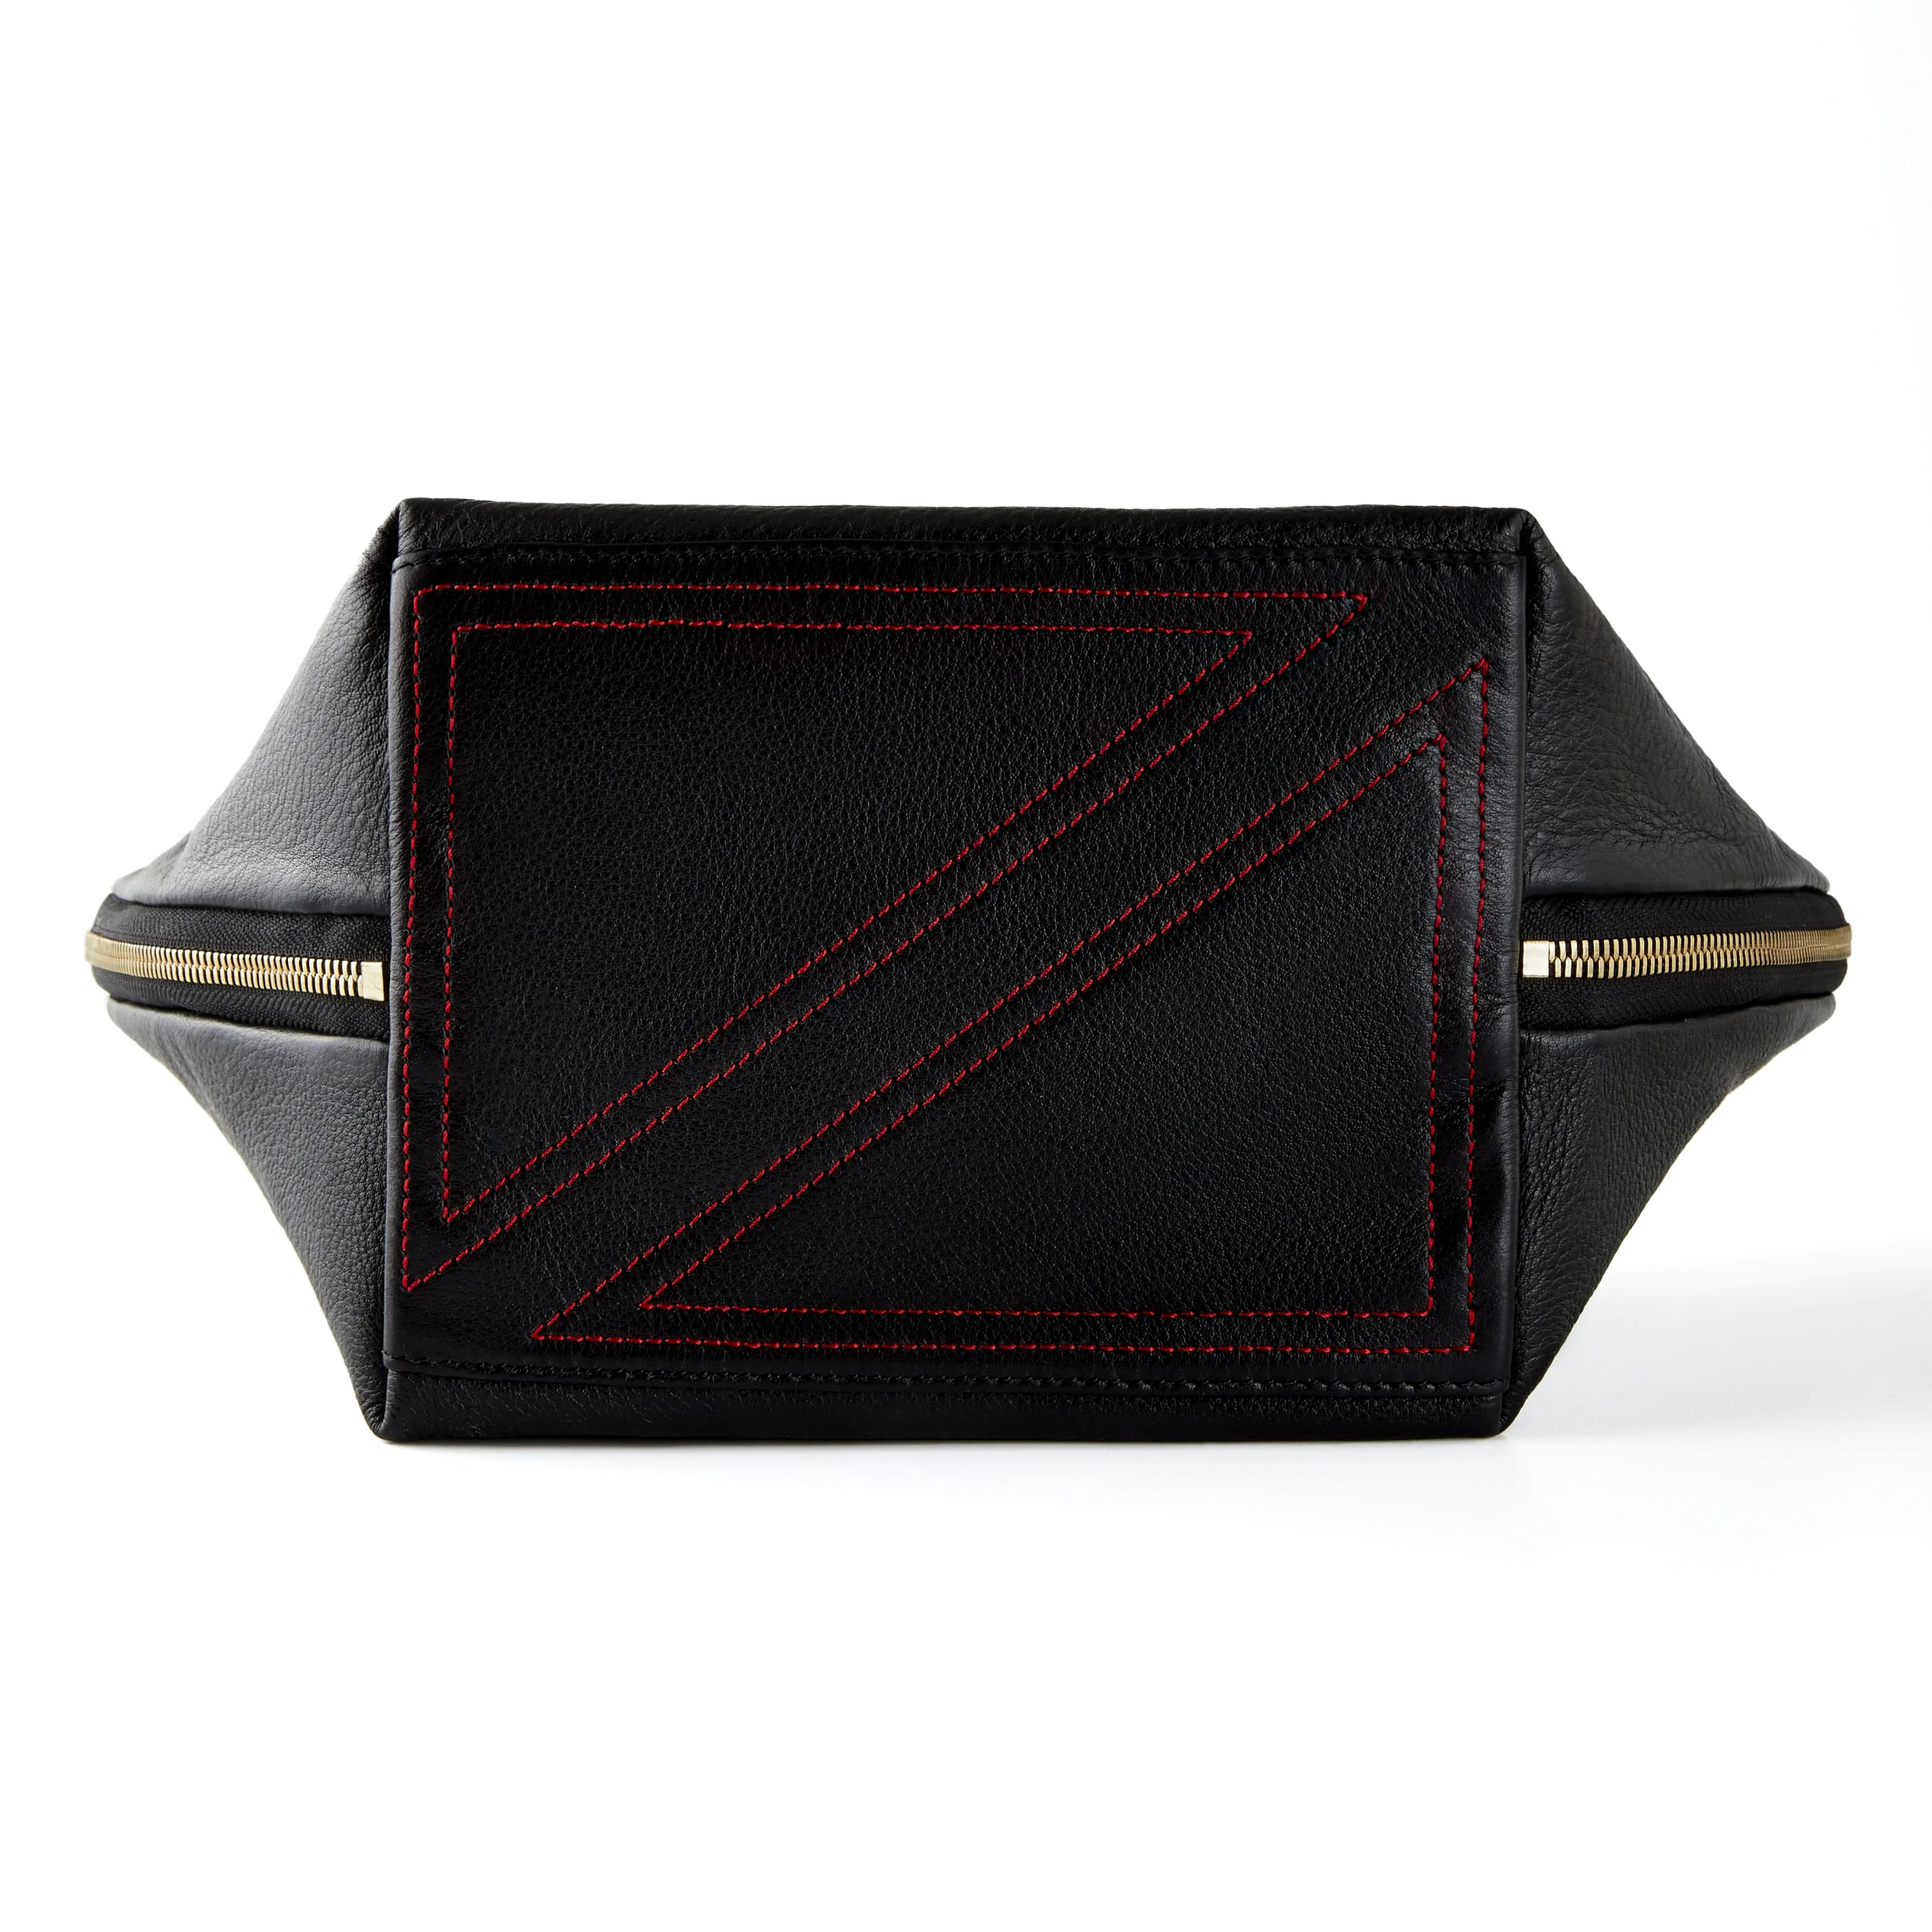 KUSSHI Vacationer Makeup Bag Leather Black with Red Interior